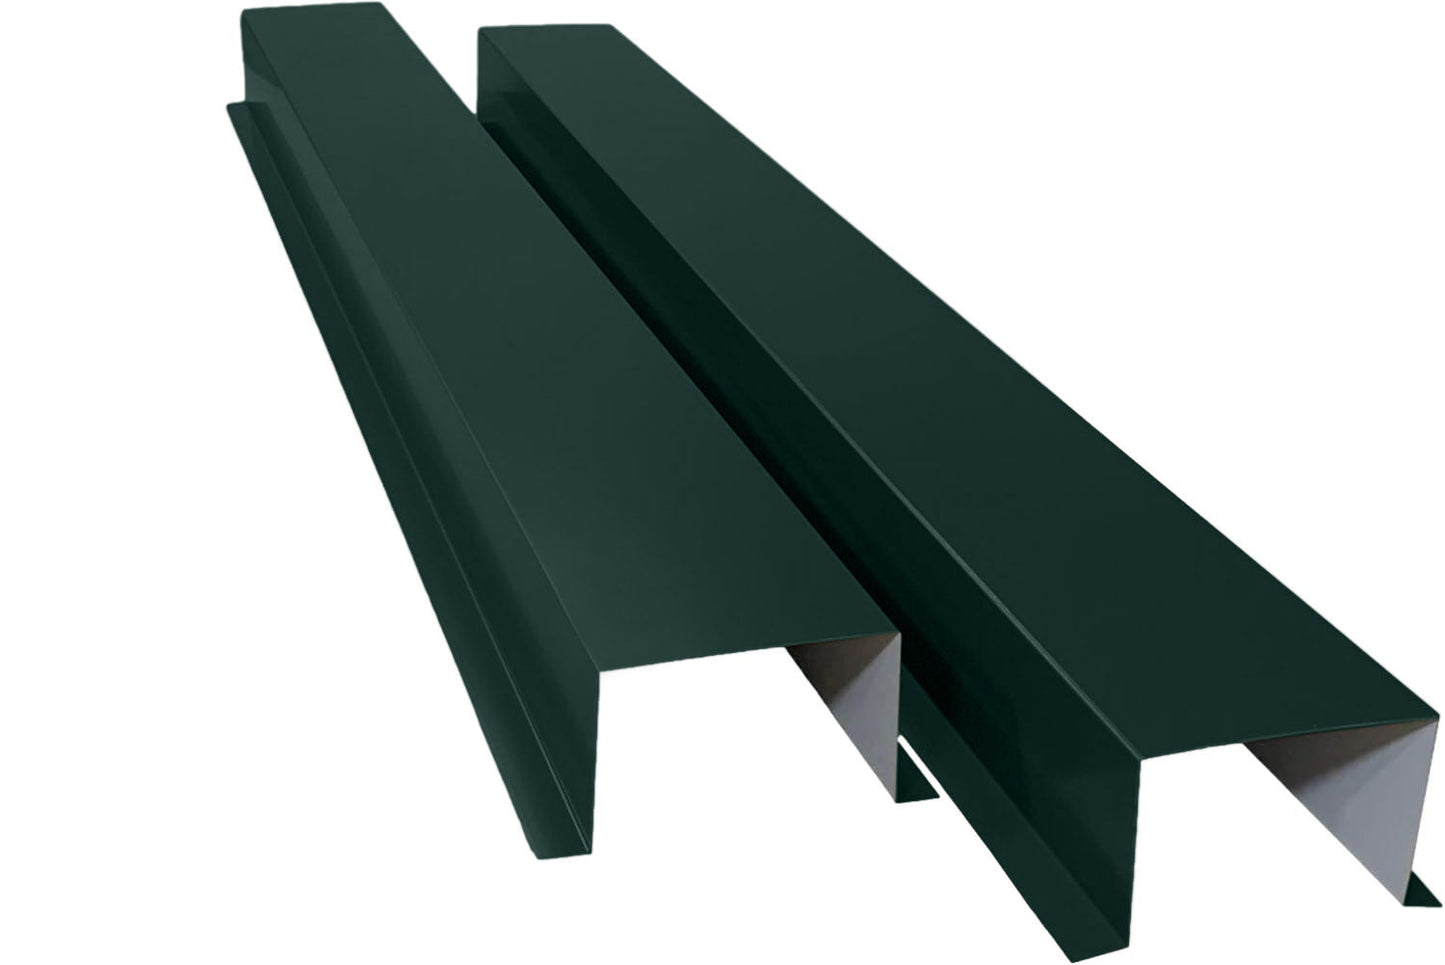 This image shows two pieces of Perma Cover Commercial Series - 24 Gauge Painted Metal HVAC Line Set Covers - Heavy Duty, Multiple Sizes & Colors in dark green used in construction. The pieces are long, rectangular, and have a bent shape, likely for use in roofing or siding to direct water away from the structure while also providing HVAC line protection.